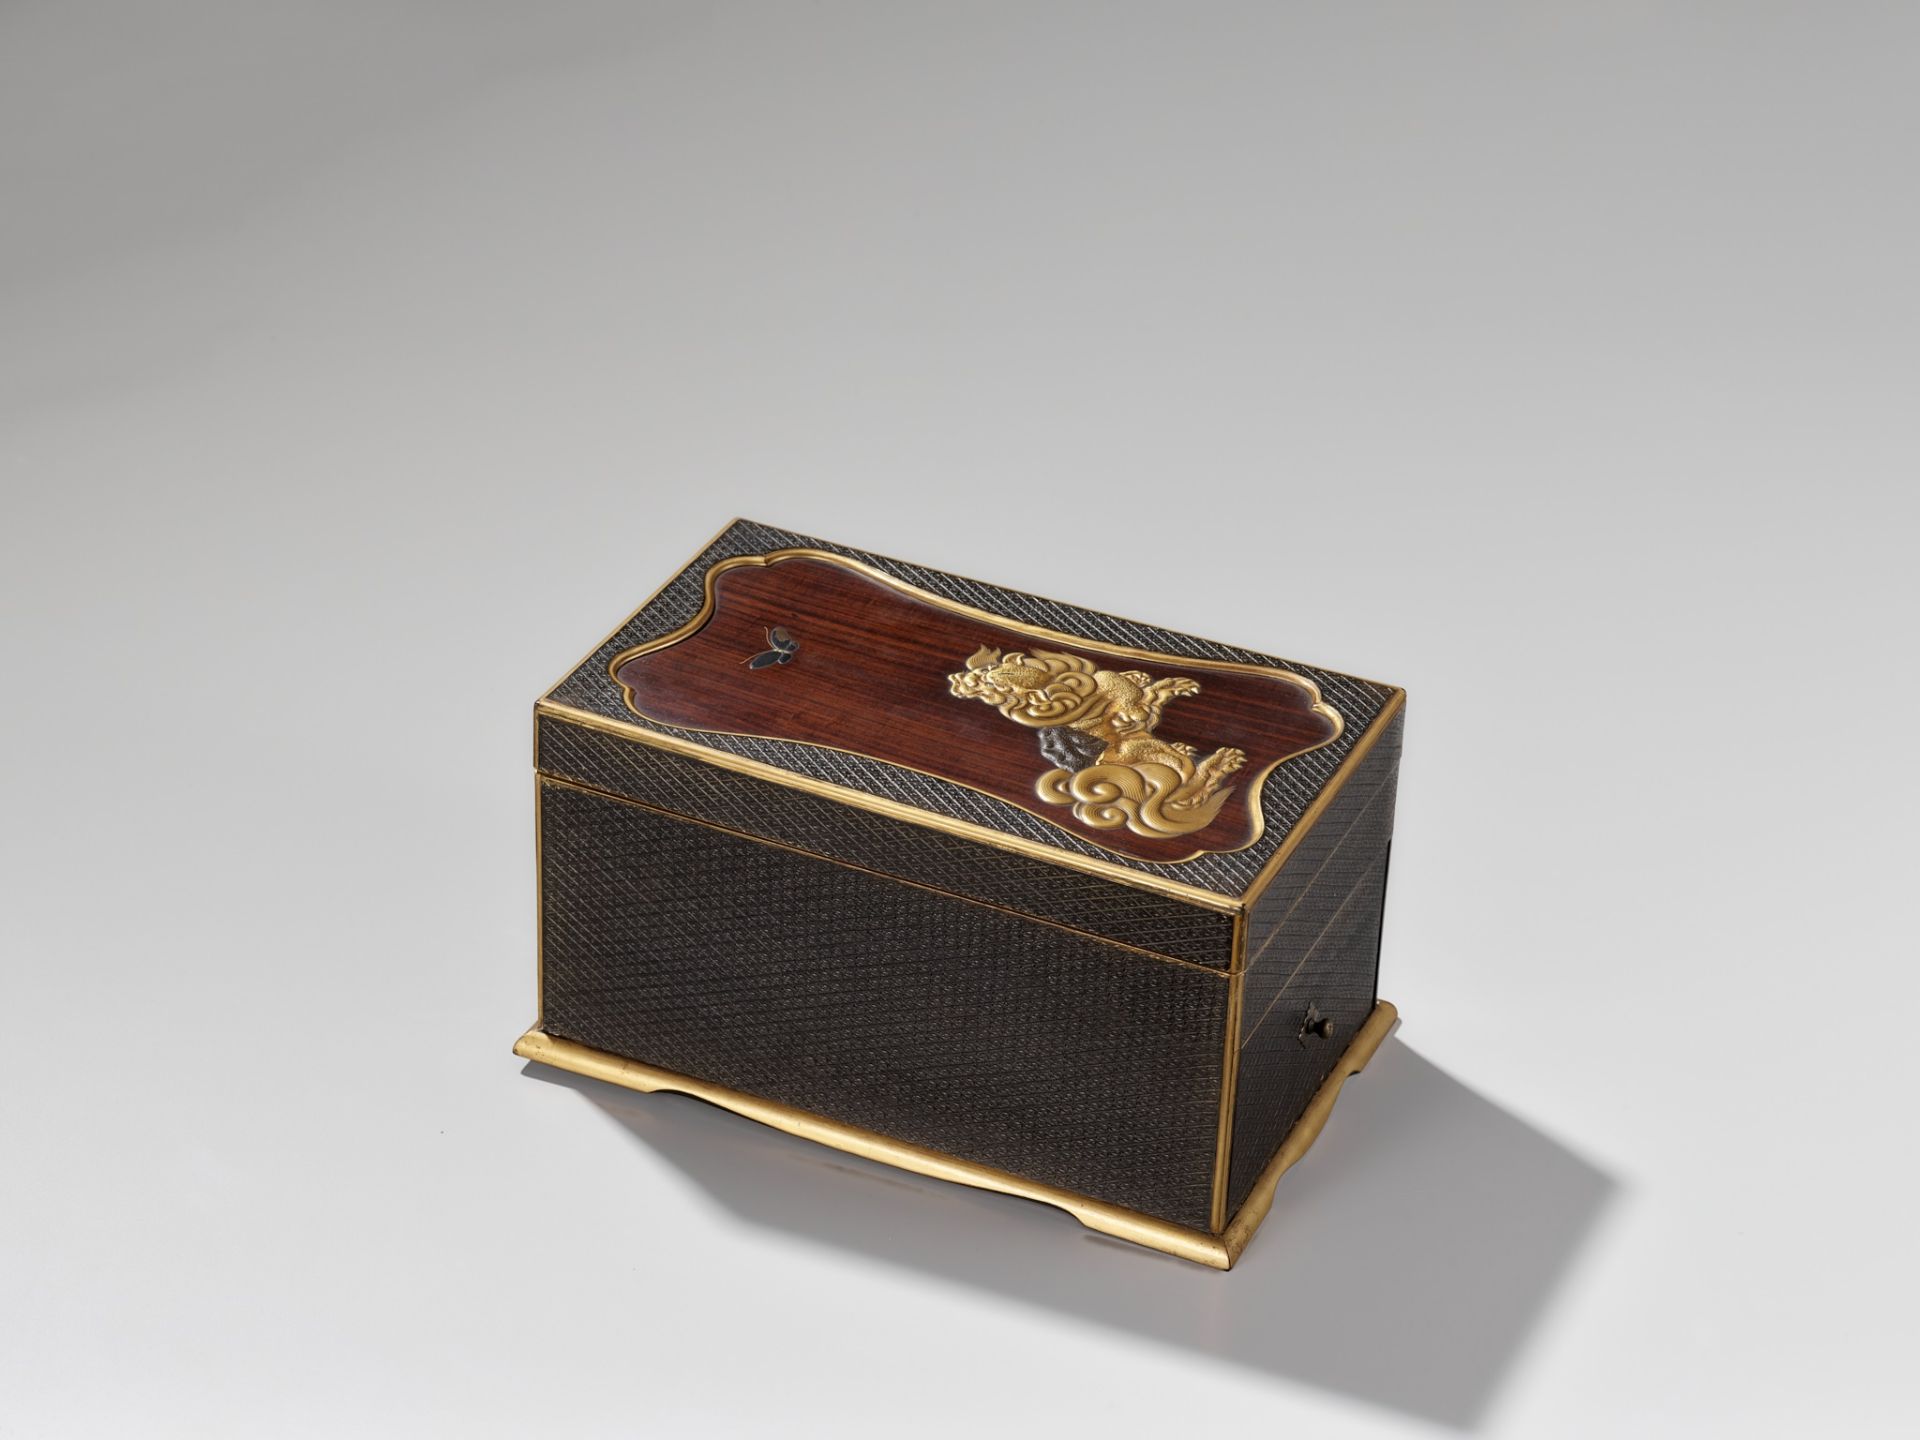 A RARE LACQUERED WOOD SUZURIBAKO (WRITING BOX) DEPICTING A SHISHI AND BUTTERFLY - Image 3 of 9